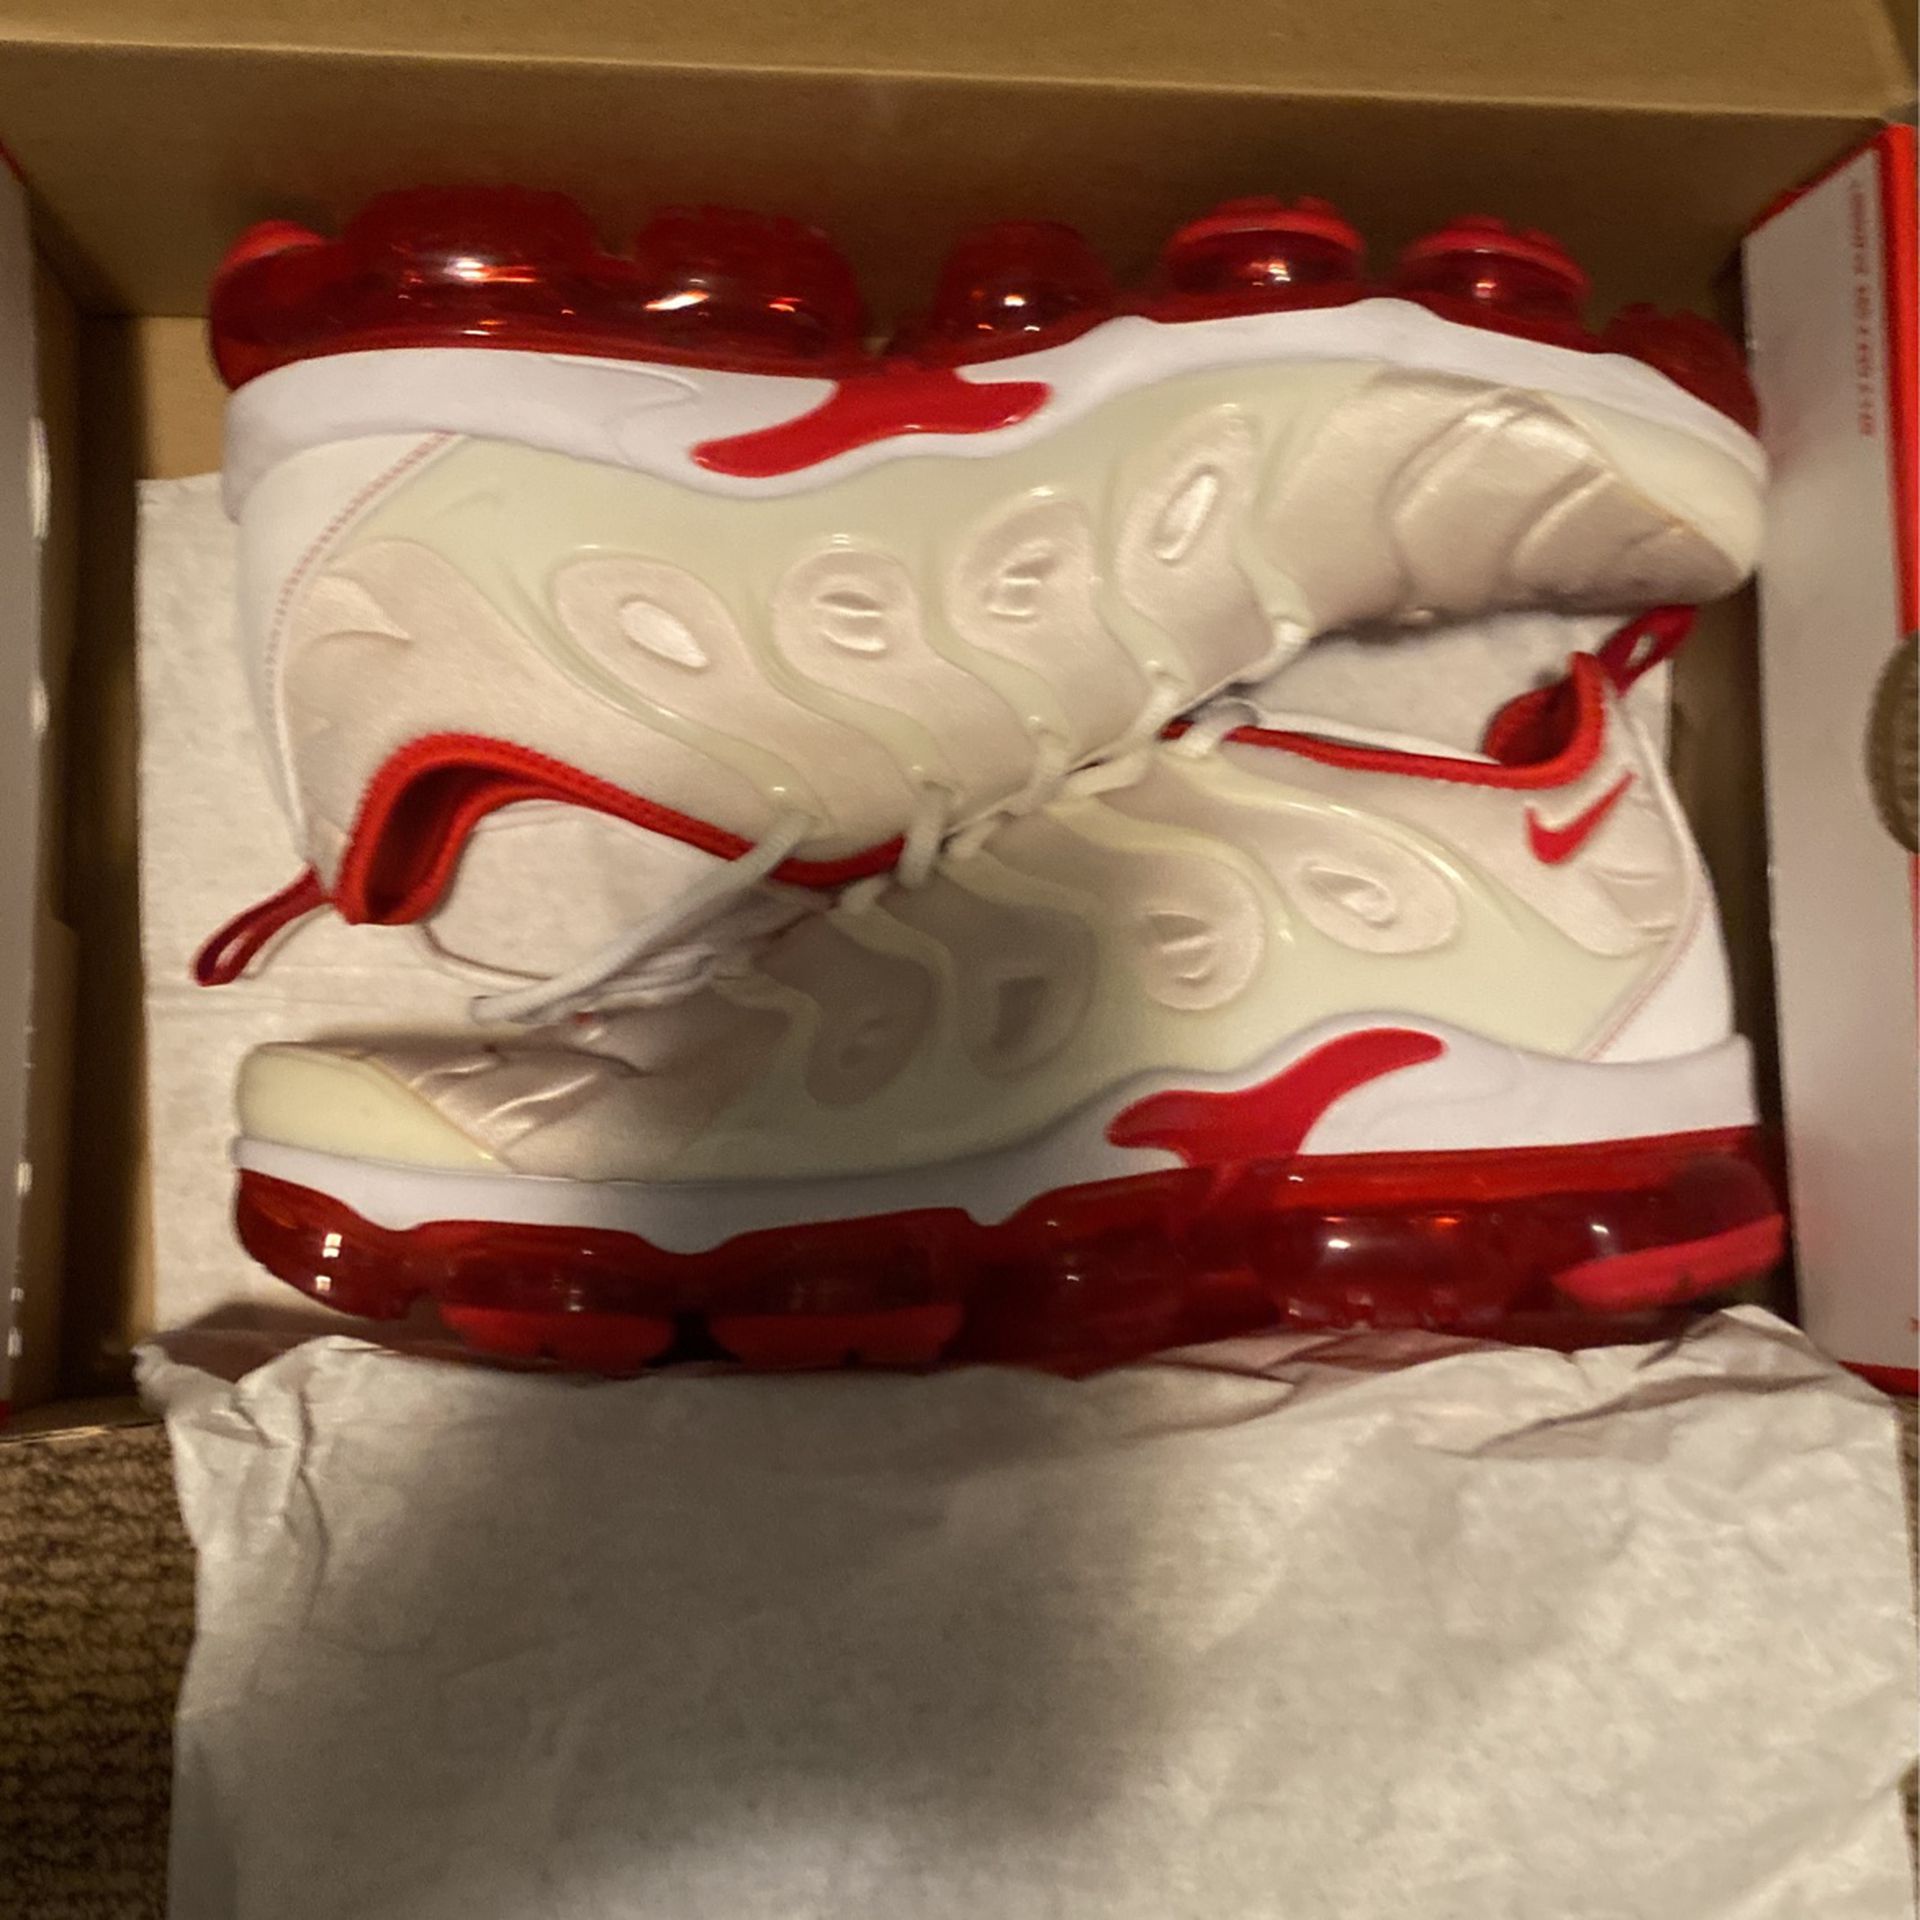 Nike Vapormax Plus, Size 11, University Red And White 